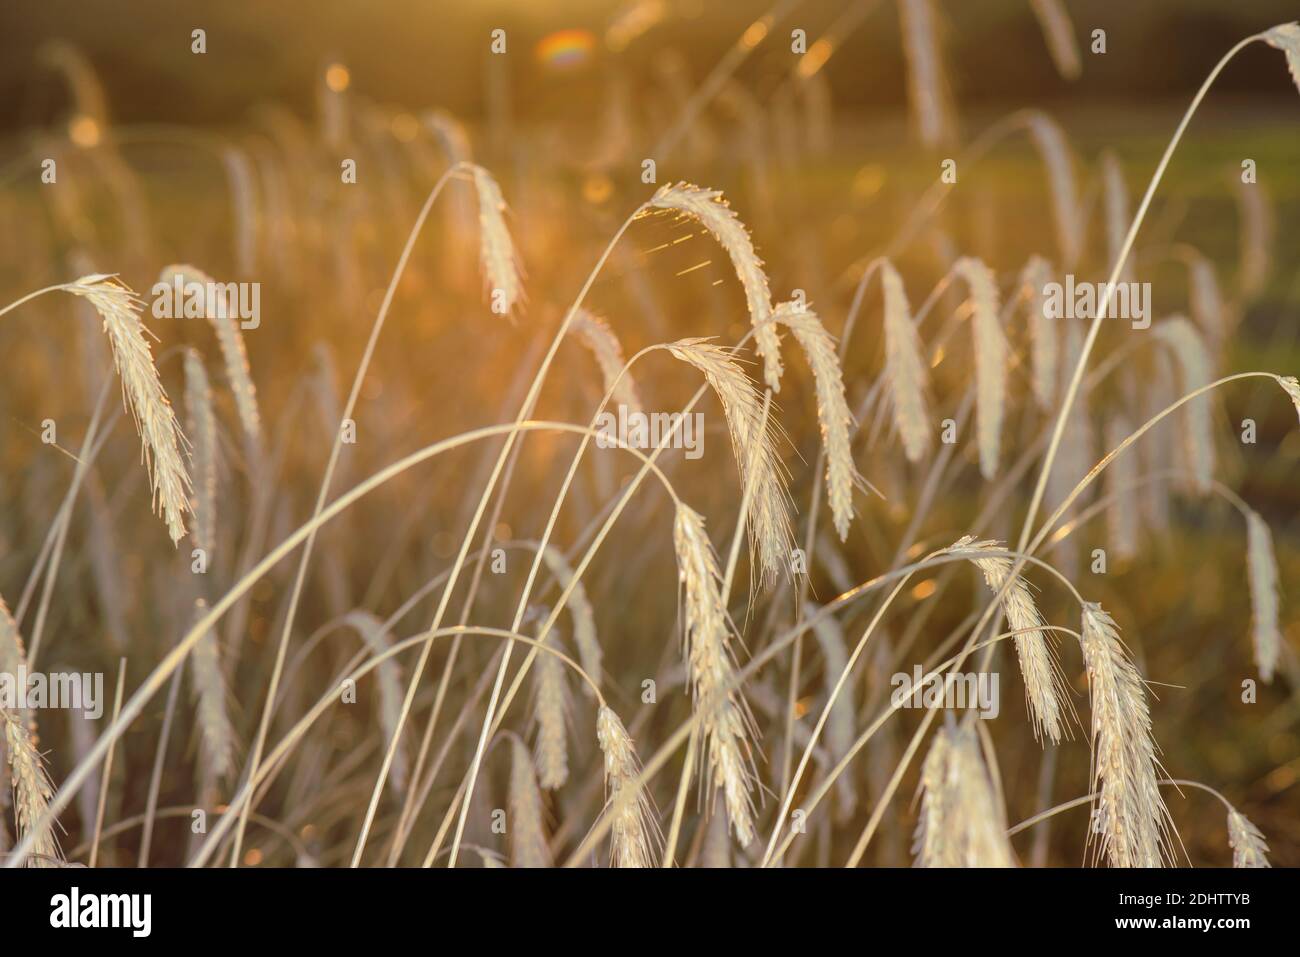 Spikelets of wheat in a field at sunrise. Stock Photo